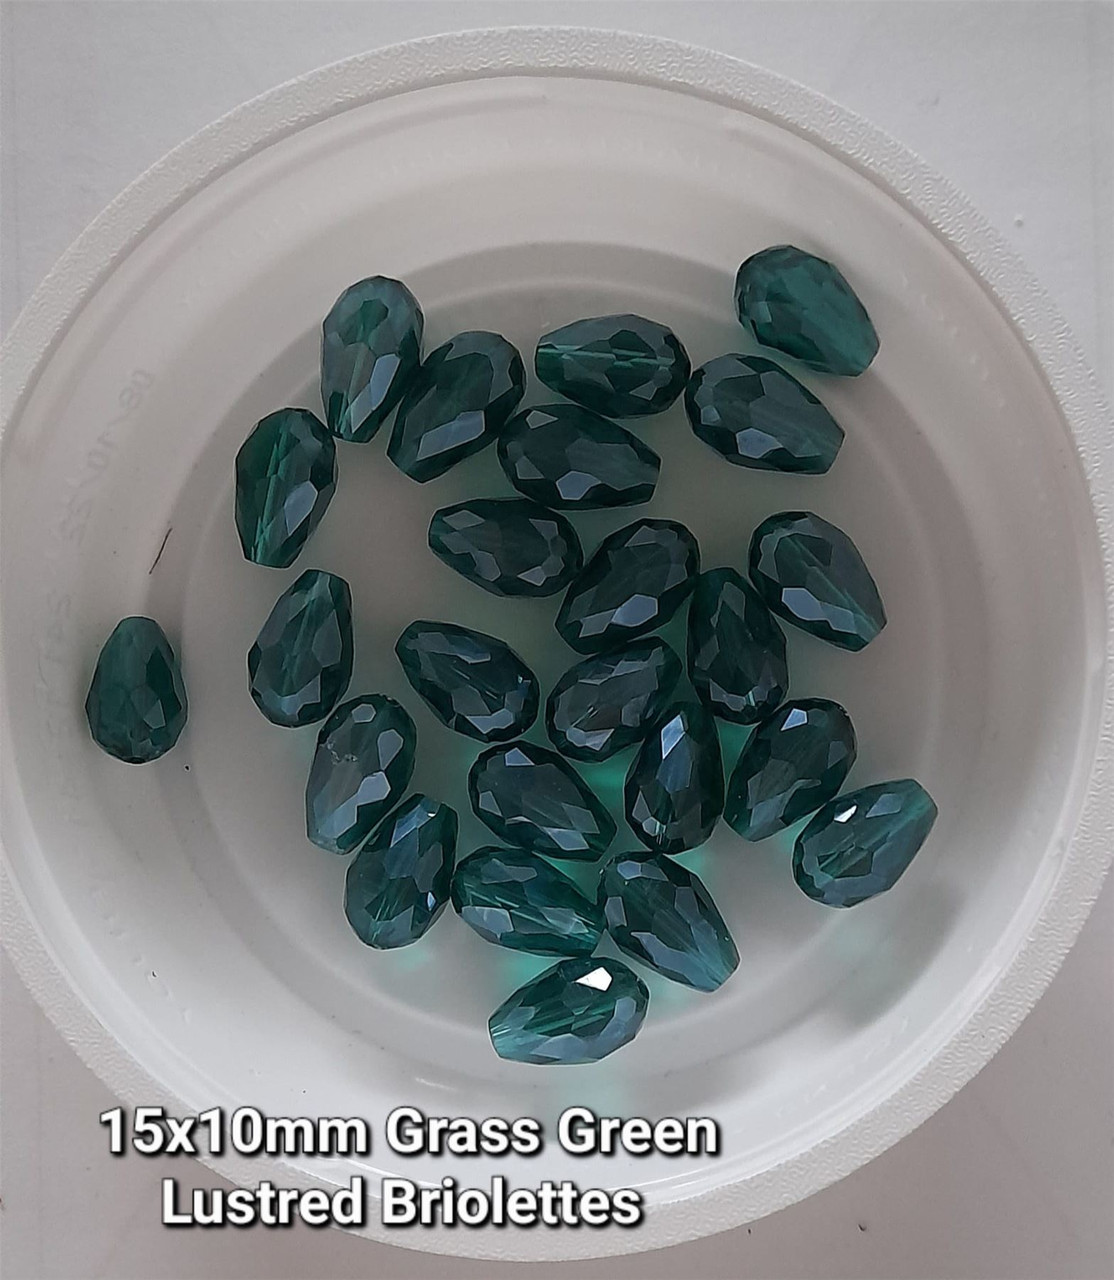 15mm x 10mm glass faceted tear drop beads (briolettes) pack of 24 beads - GRASS GREEN LUSTERED